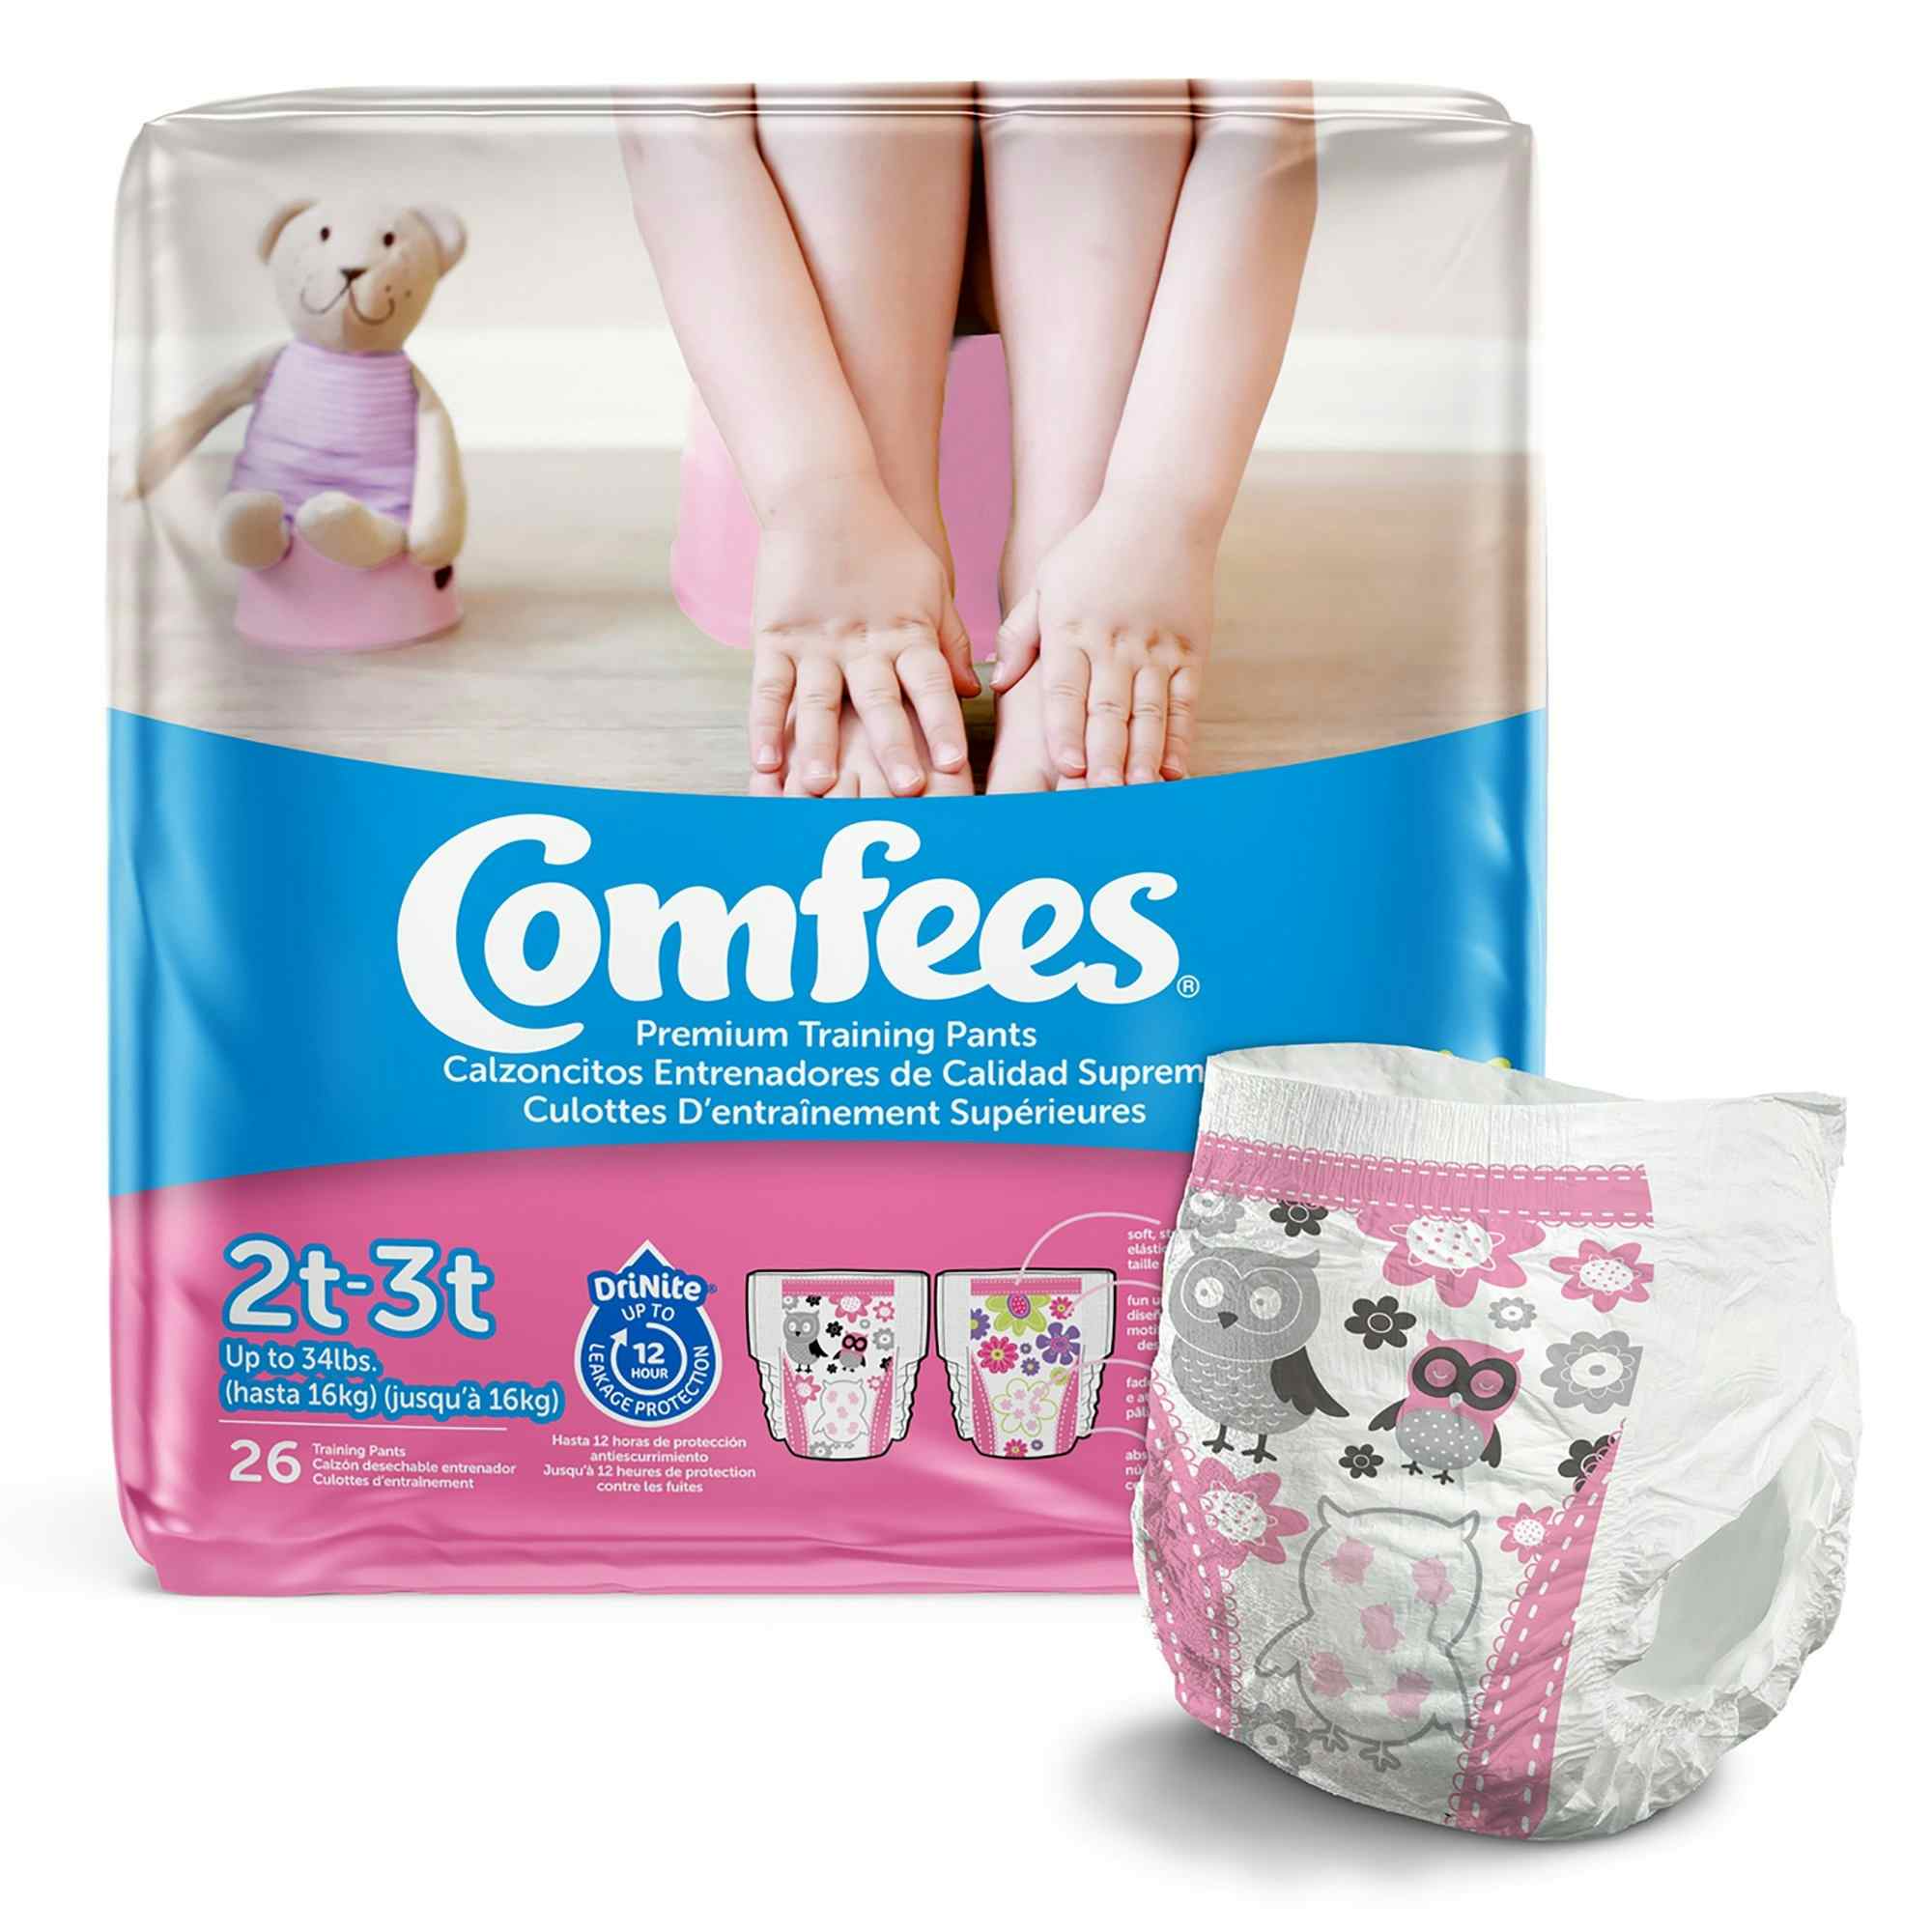 Comfees Toddler Premium Training Pants, Moderate Absorbency, CMF-G2, 2T - 3T (	Up to 34 lbs.) - Girl - Case of 156 (6 Bags)